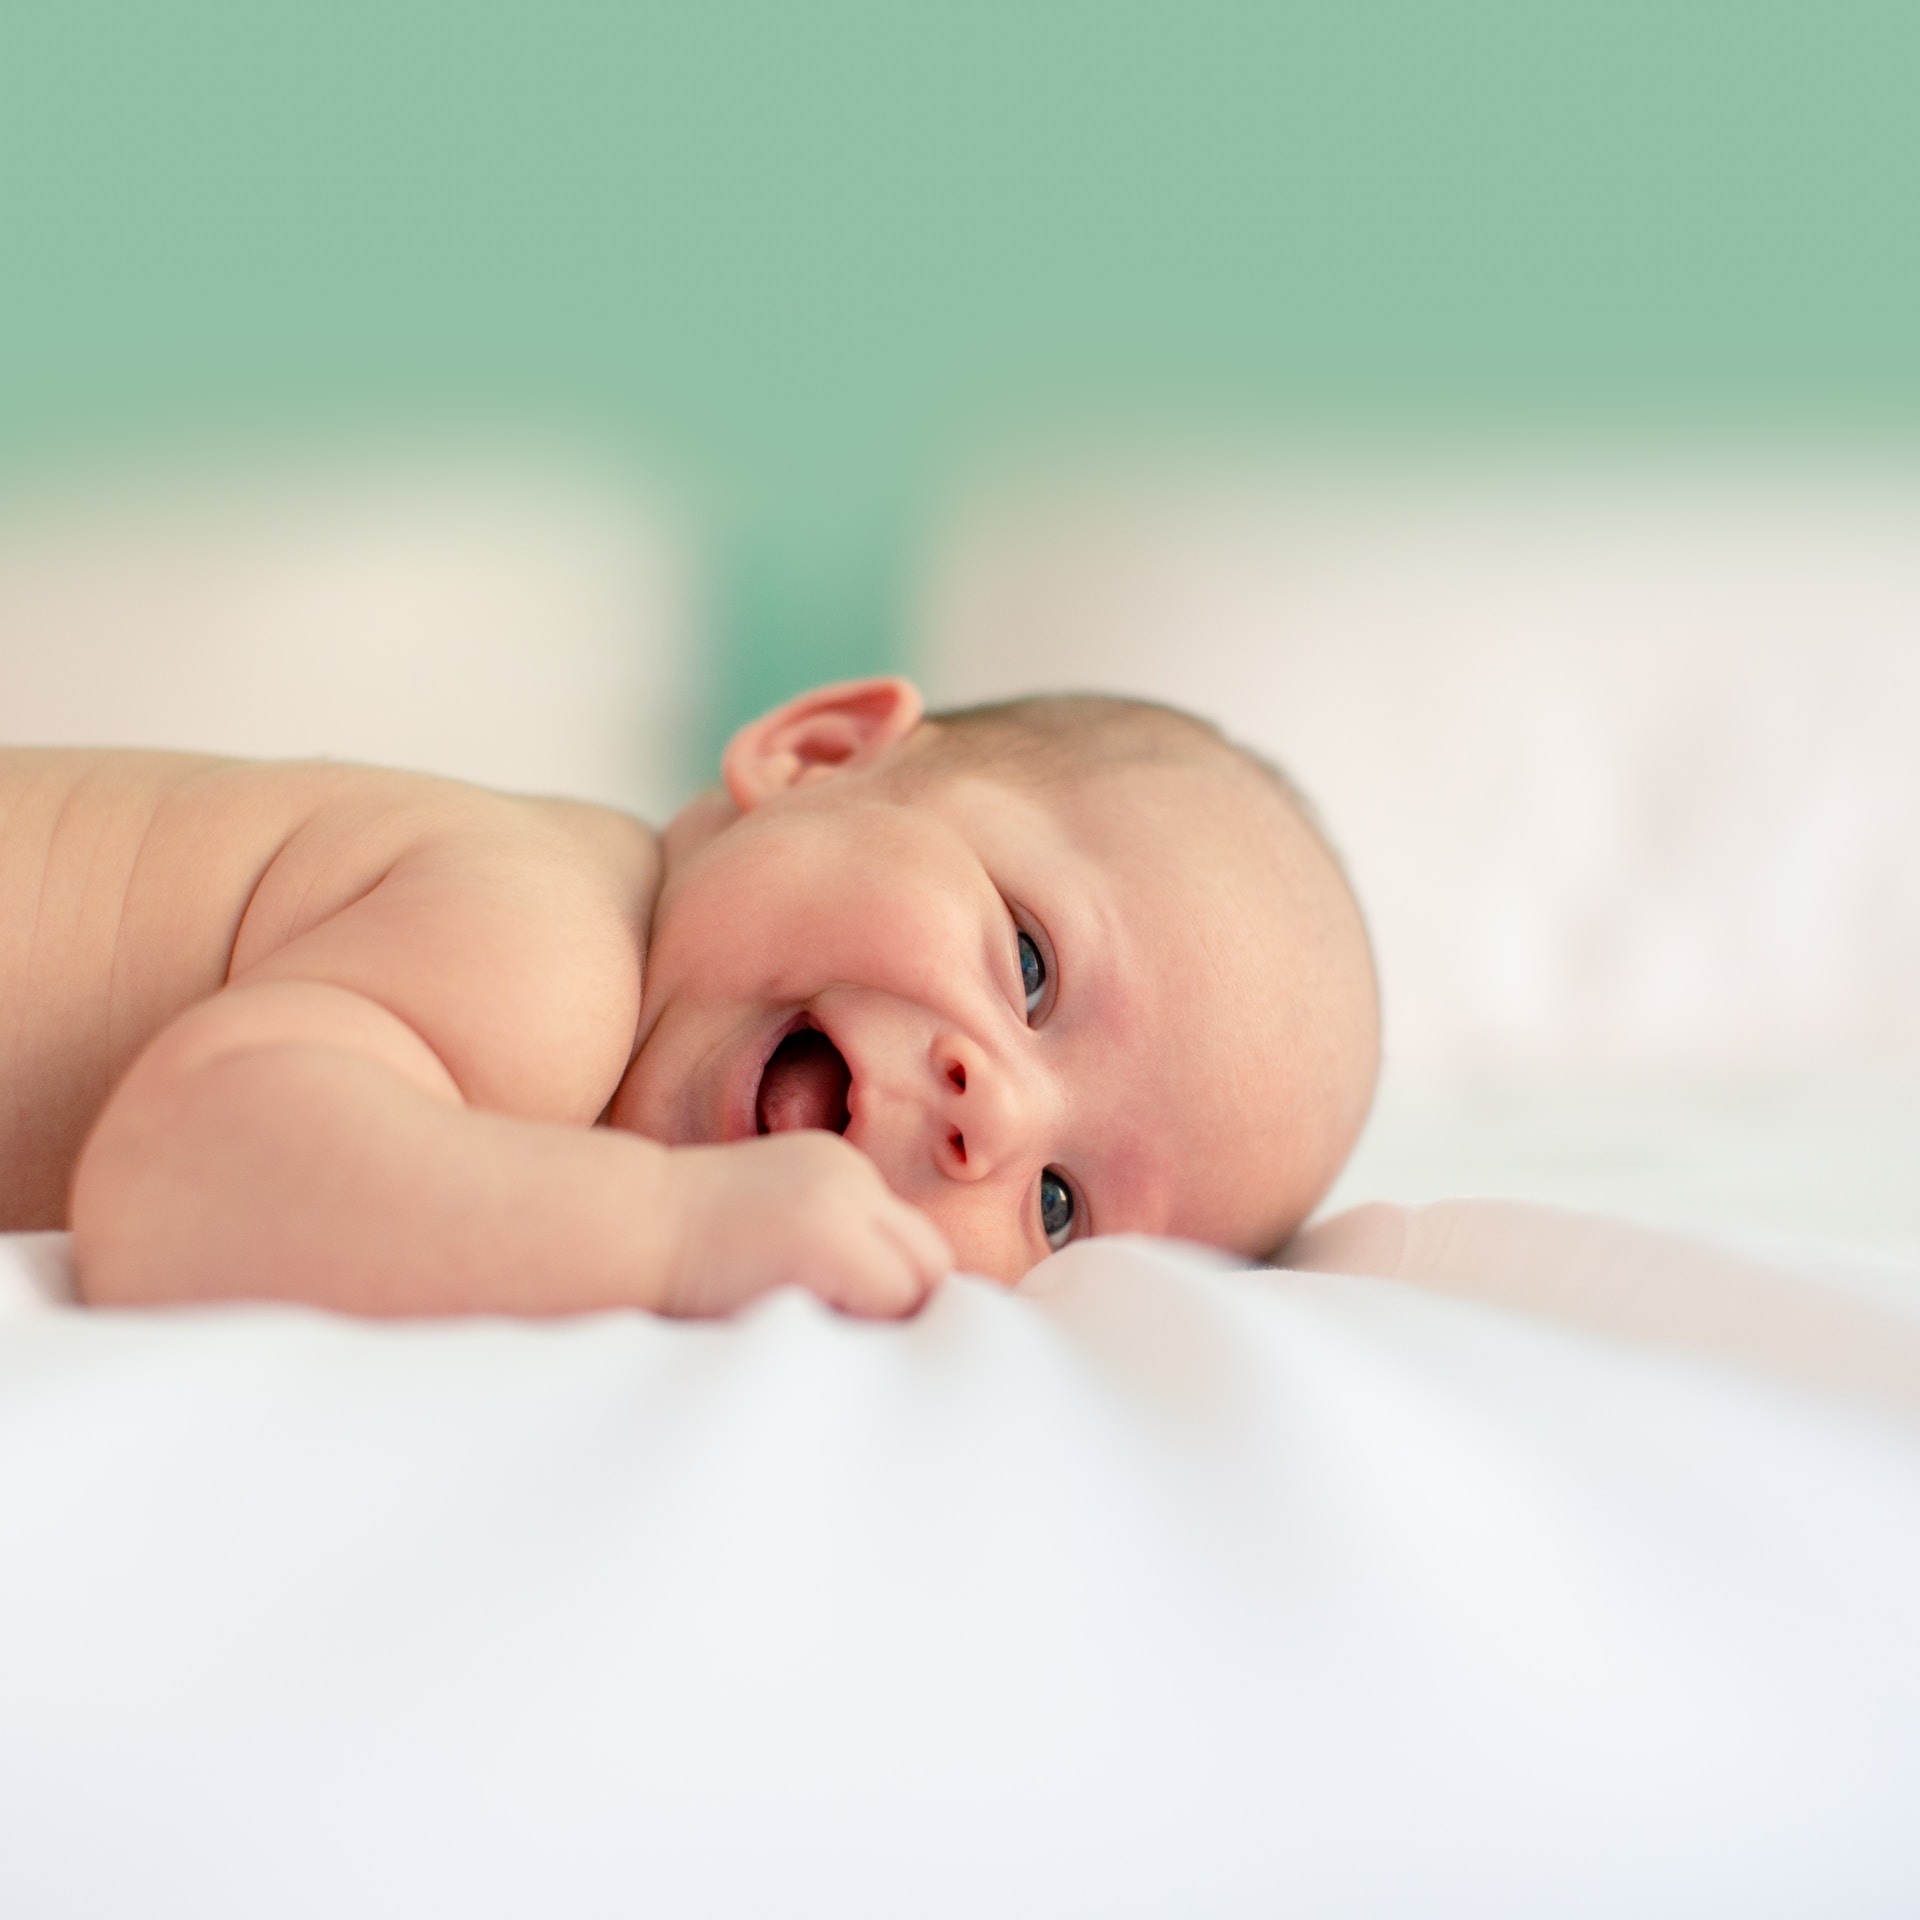 Photo of a smiling infant lying on a bed.